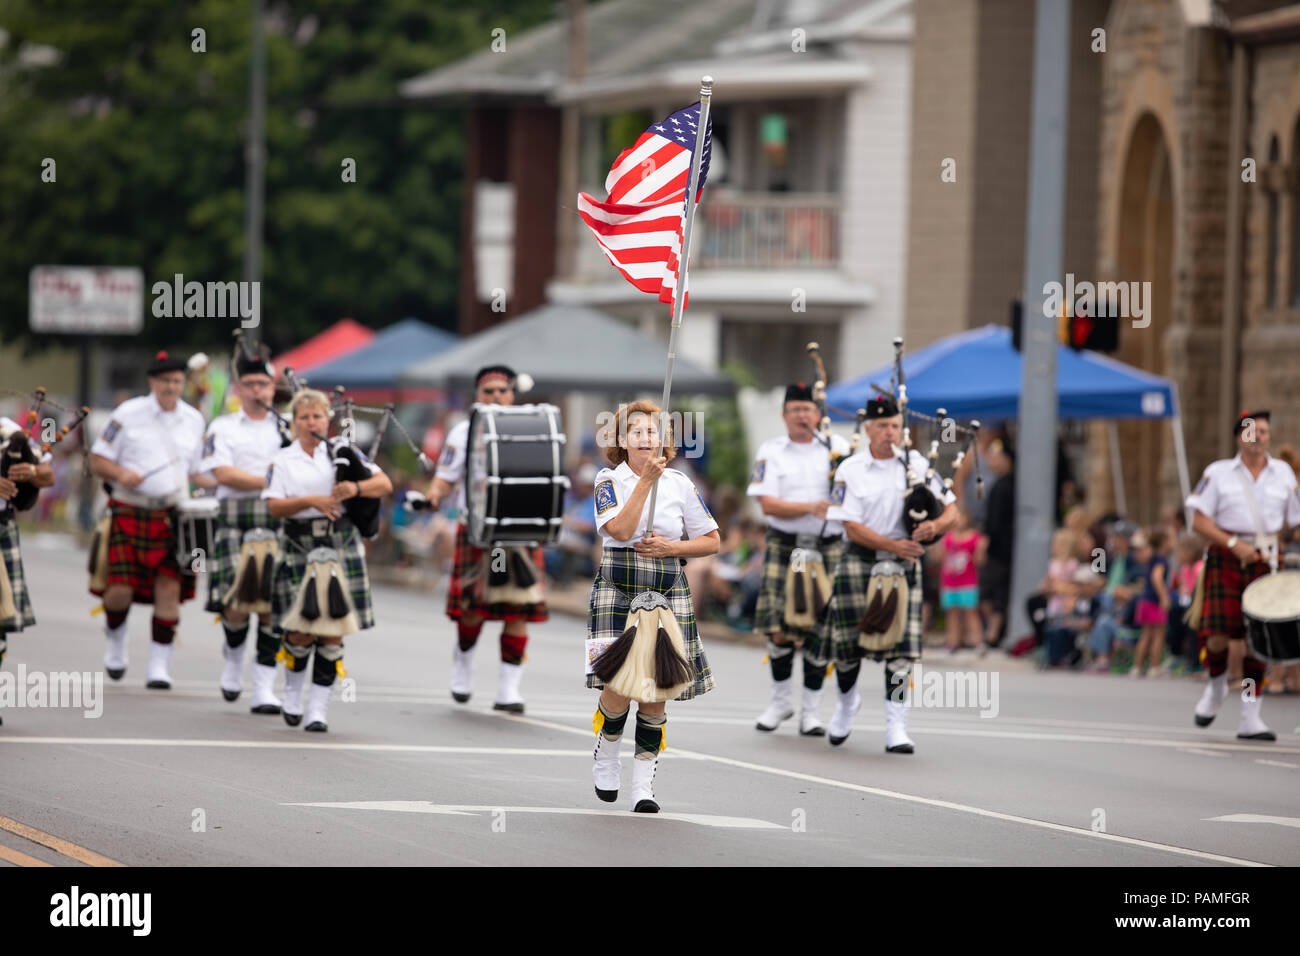 Peru, Indiana, USA - July 21, 2018 Woman carries the American flag leading the Indianapolis 500 Gordon Pipers Horse Shoe Pipes and Drums group of bagp Stock Photo